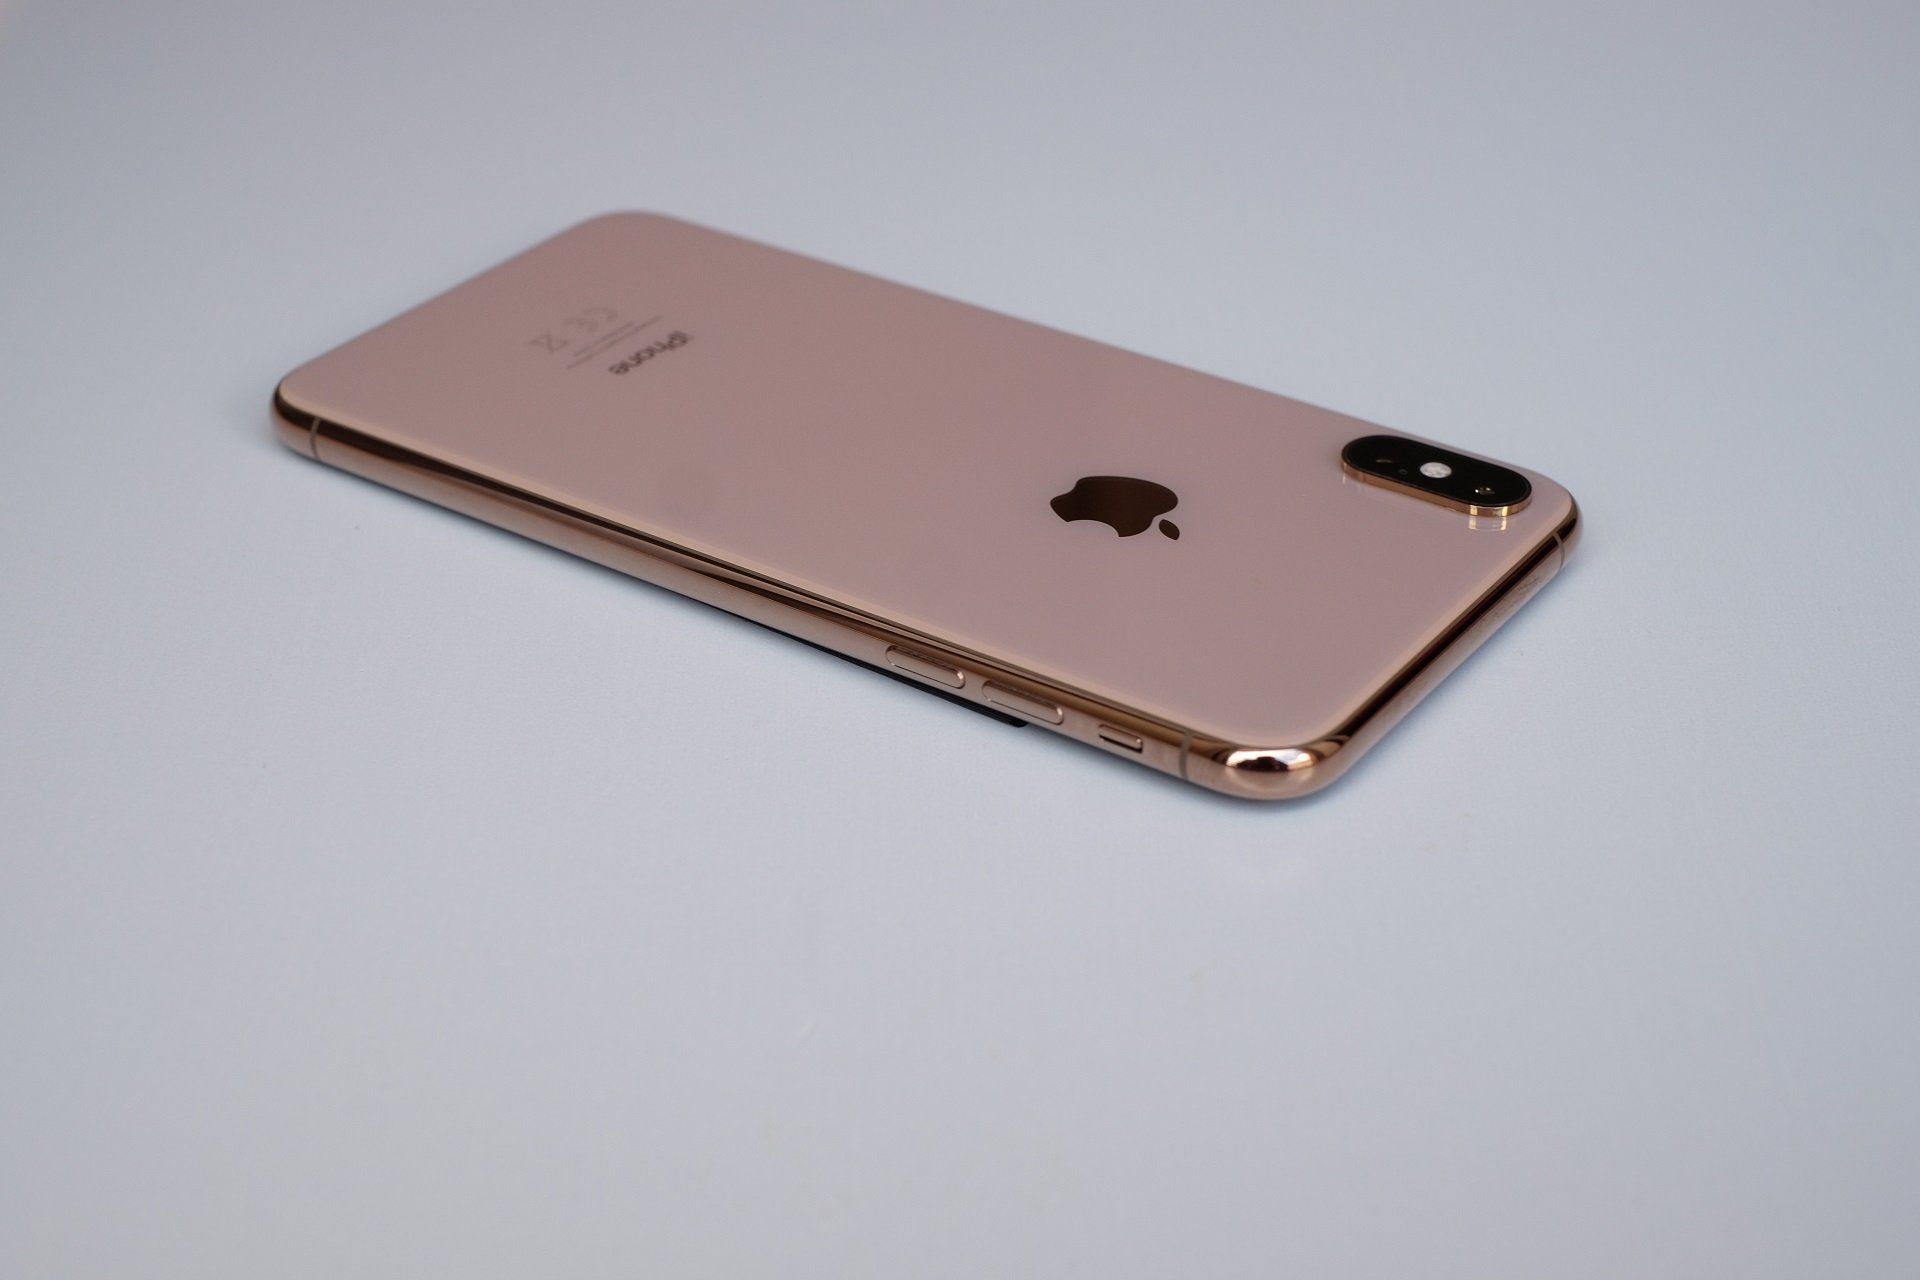 More information about "Apple iPhone XS Max 64GB Gold"